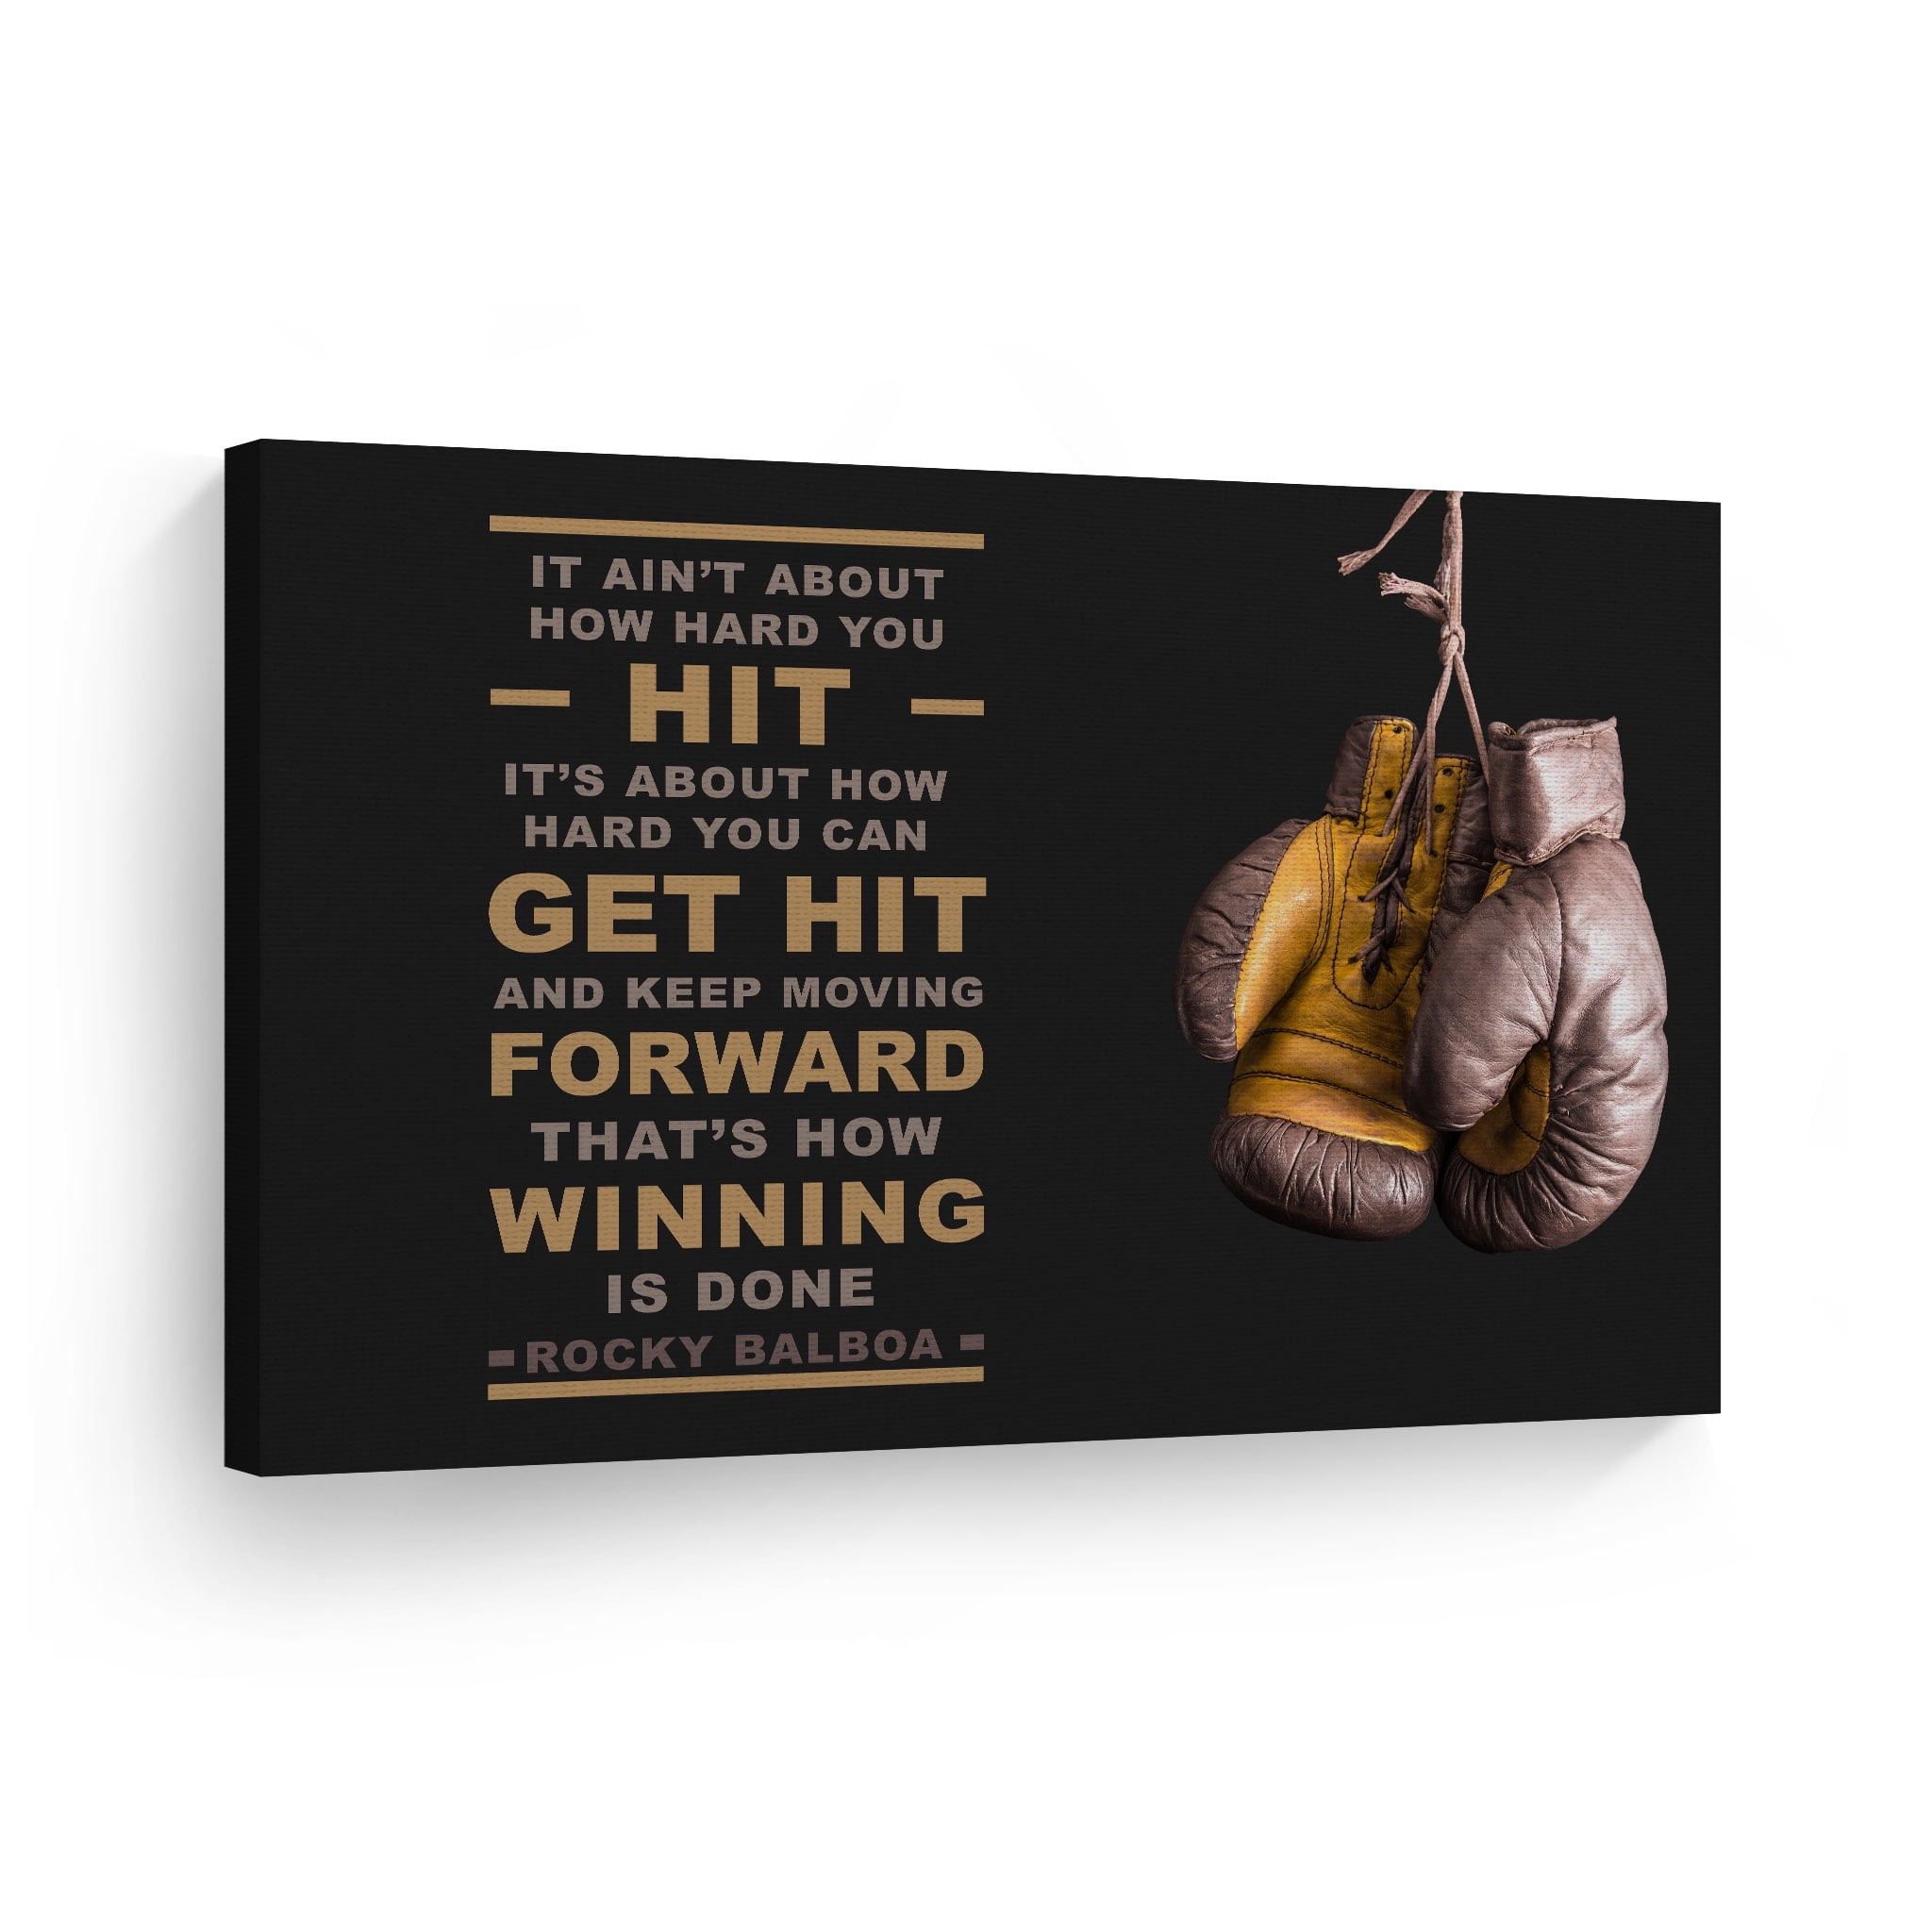 ROCKY BALBOA HIS QUOTES PICTURE PRINT FRAMED CANVAS WALL ART HOME DECORATION 